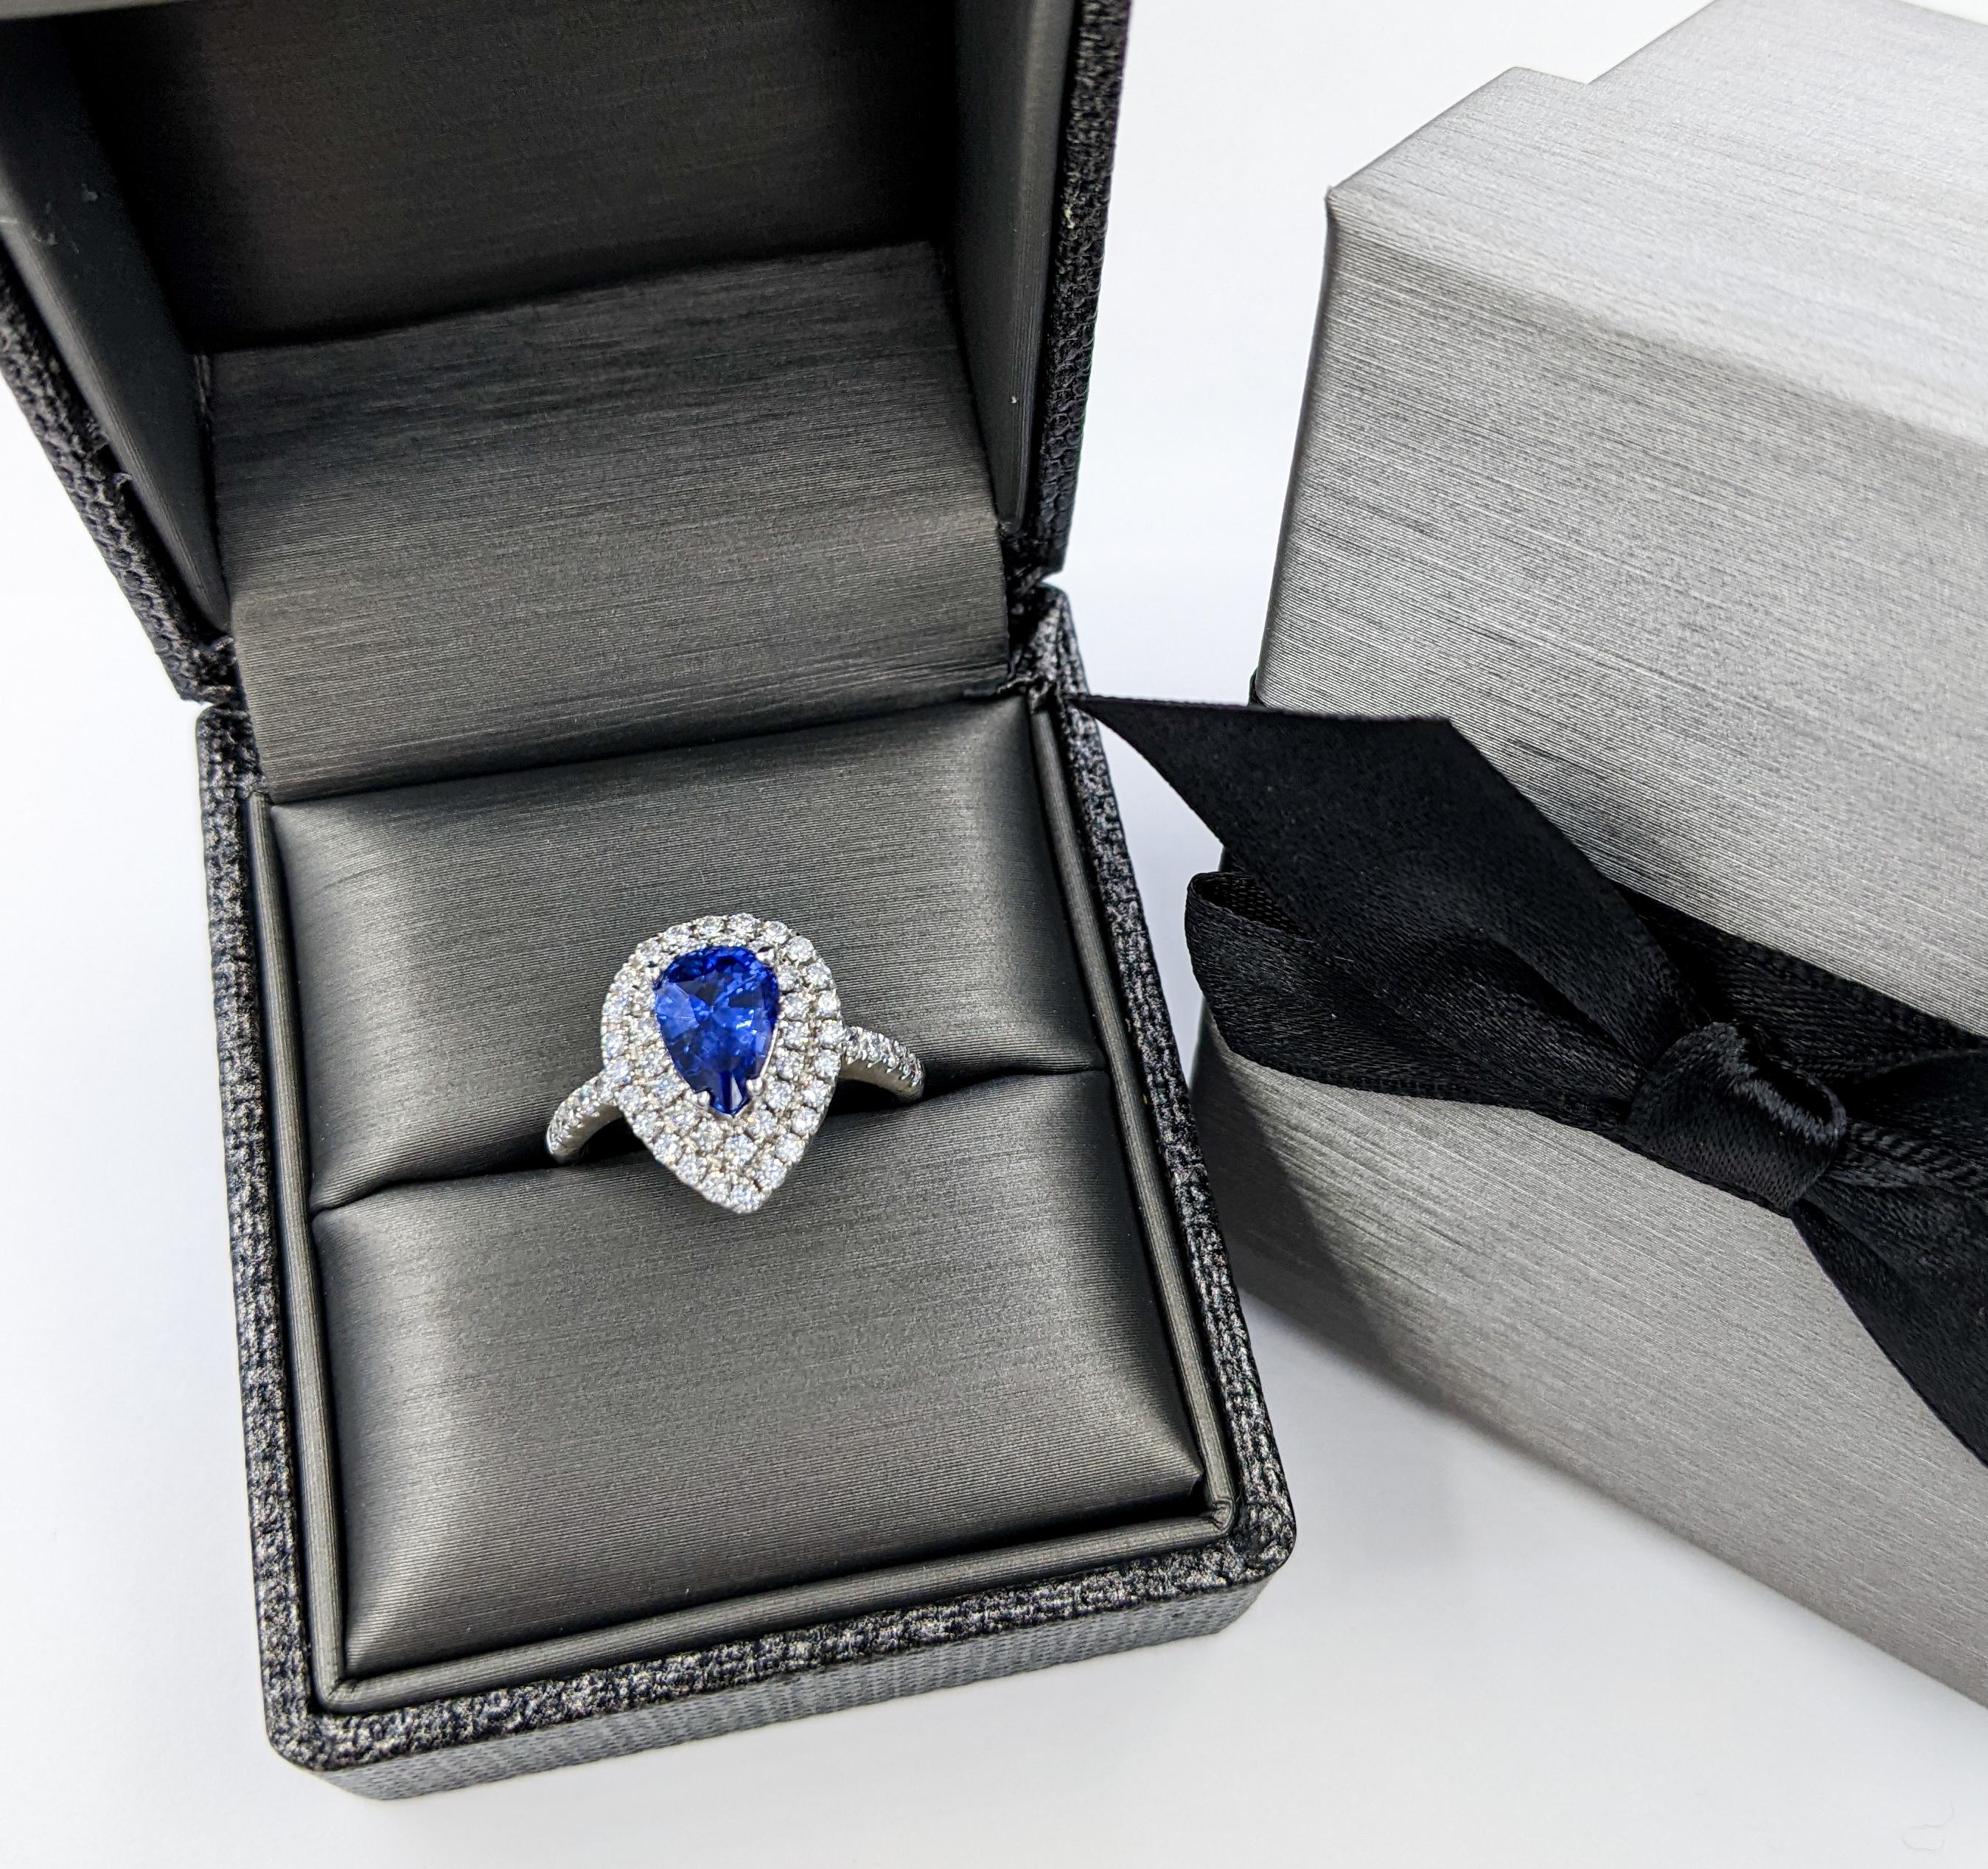 Pear Cut Stunning 2.00ct Sapphire & Diamond Cocktail Ring - 18K White Gold For Sale